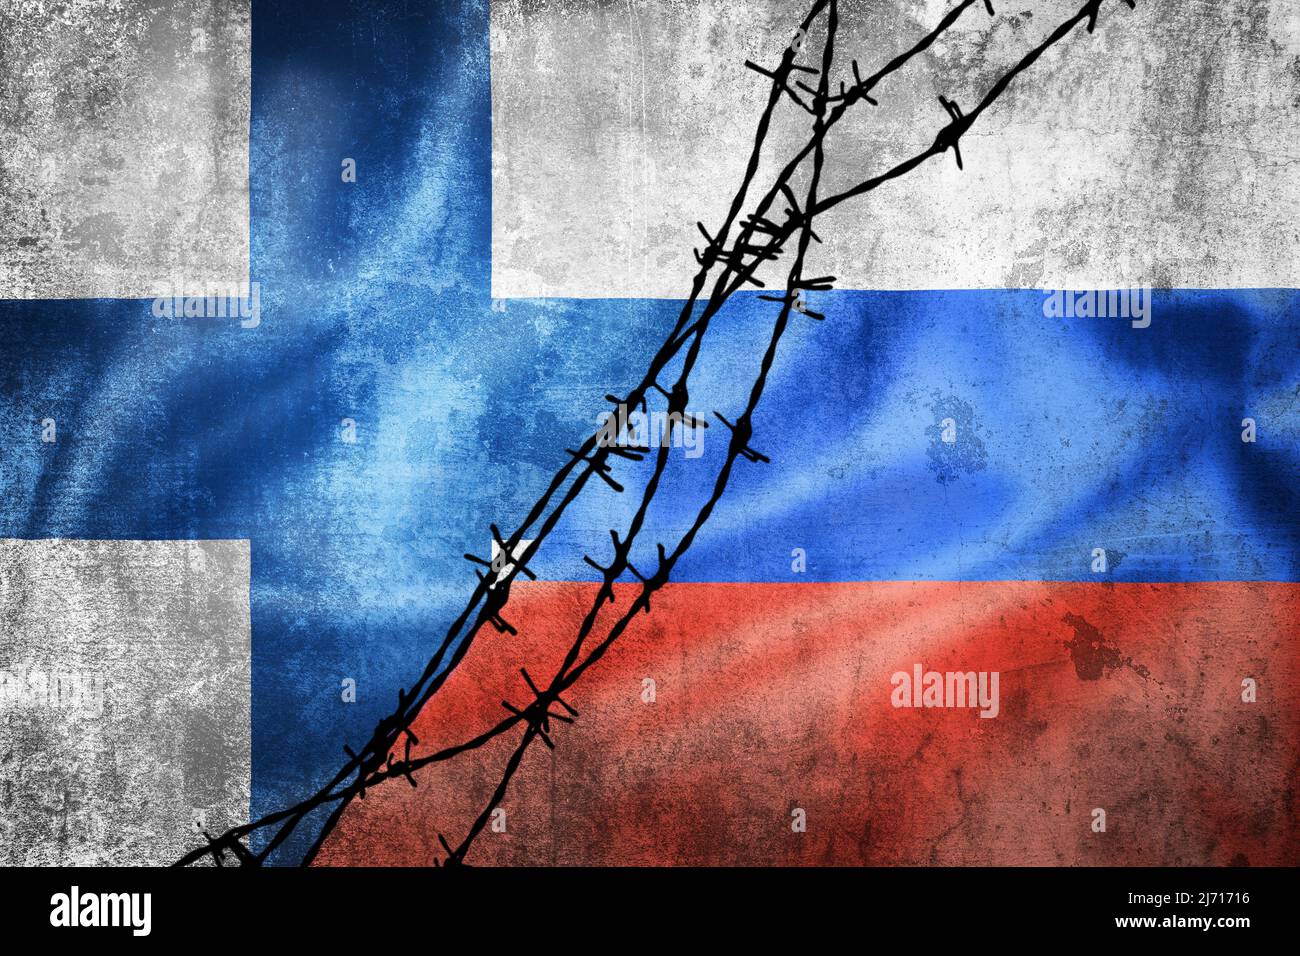 Grunge flags of Russian Federation and Finland divided by barb wire illustration, concept of tense relations between west and Russia Stock Photo